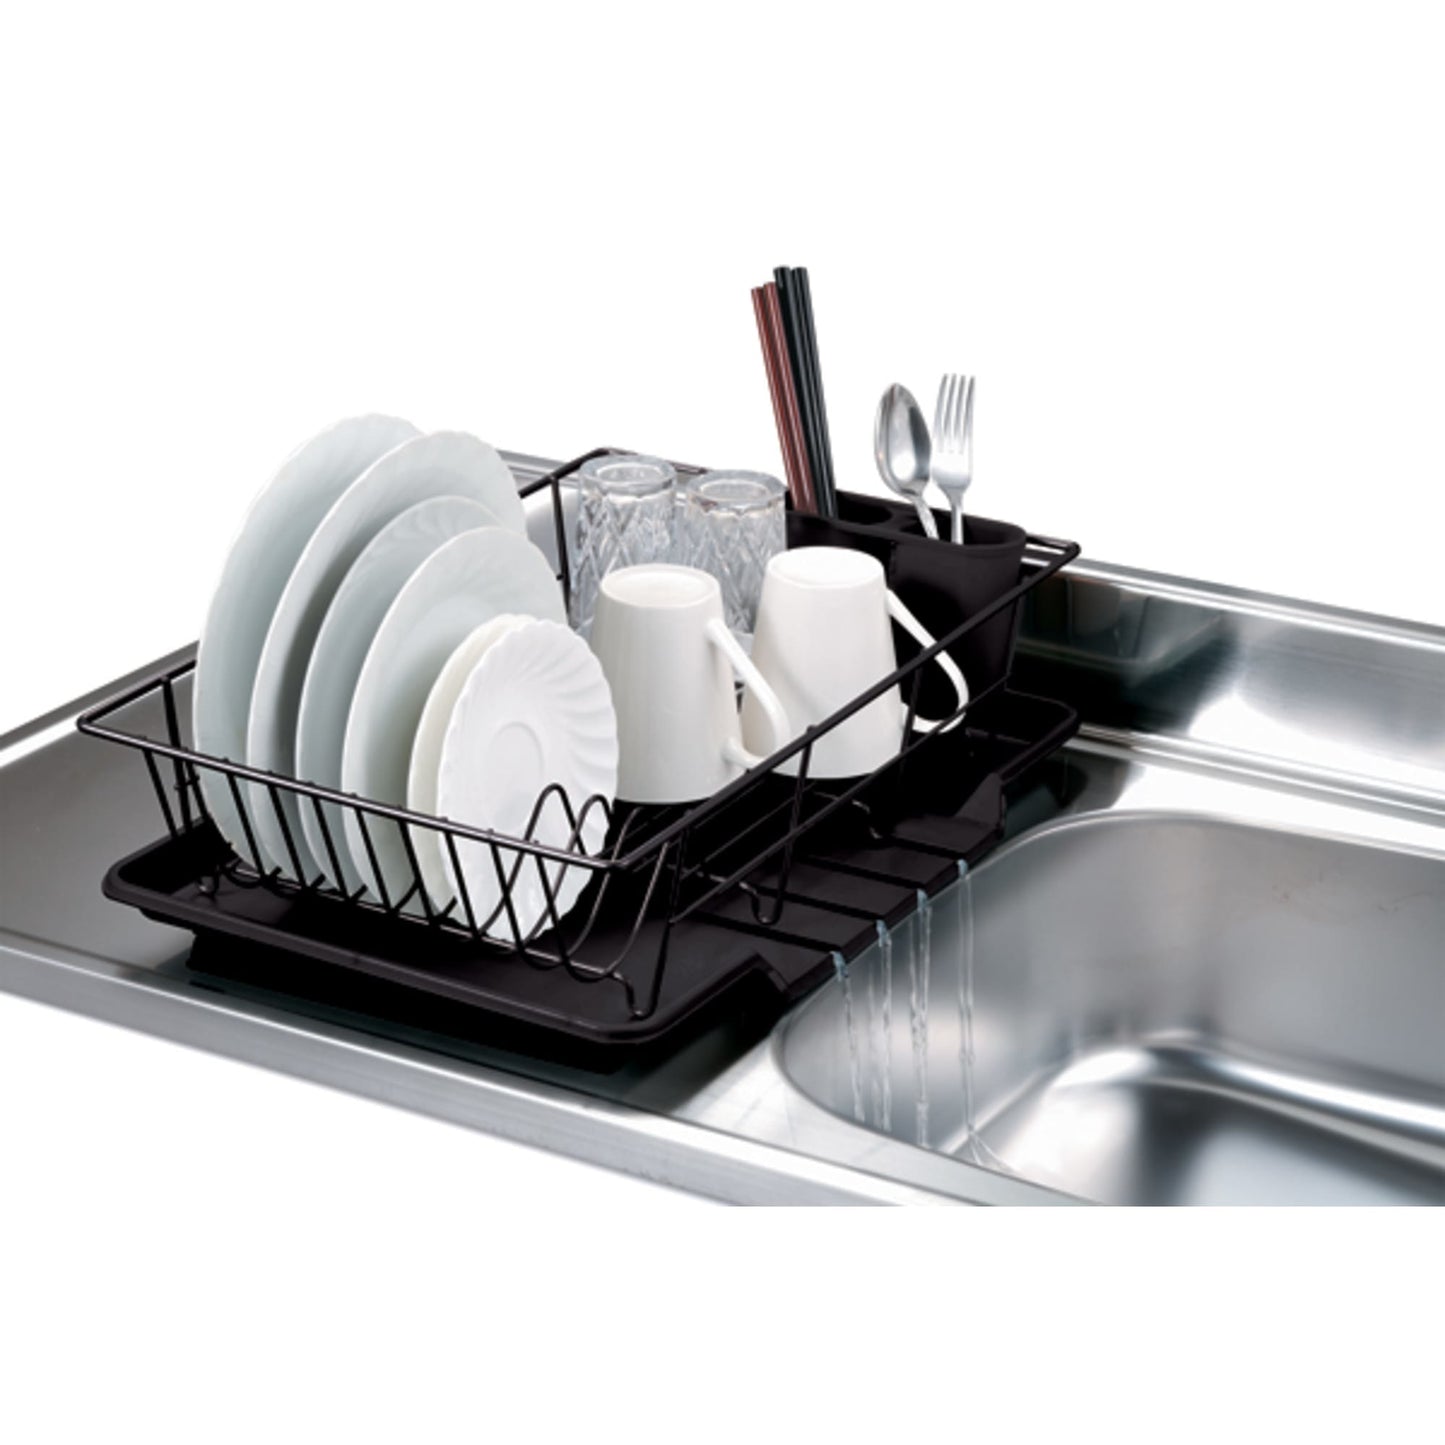 Stainless Steel Compact Dish-Drying Rack Space Saver Rust